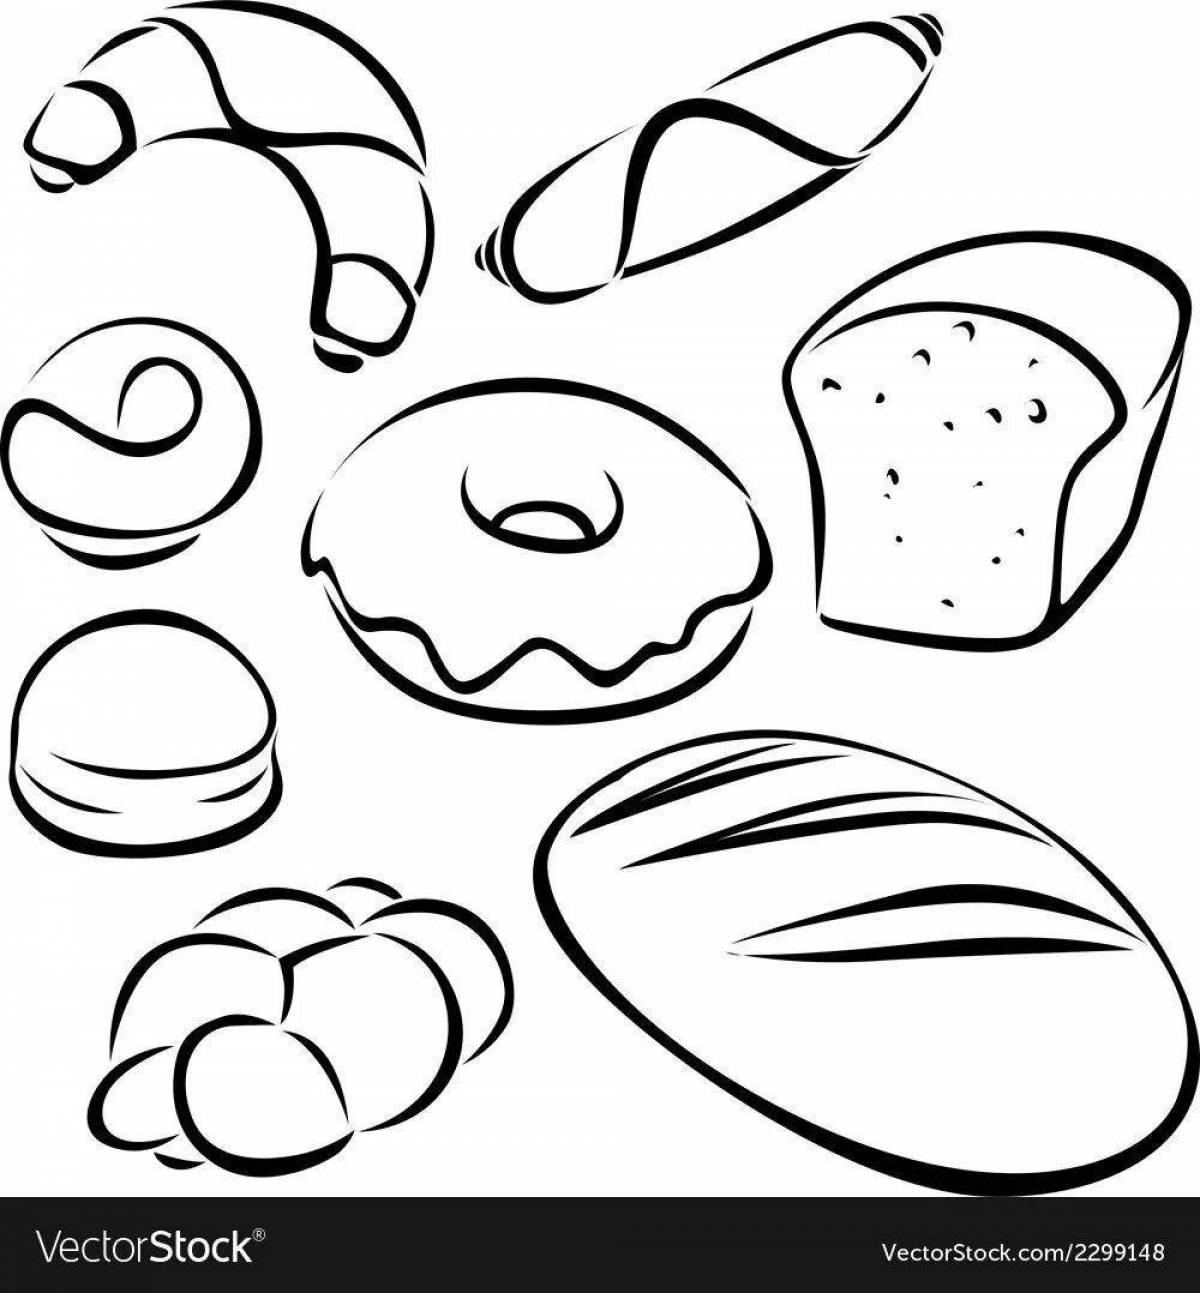 Coloring juicy bakery products